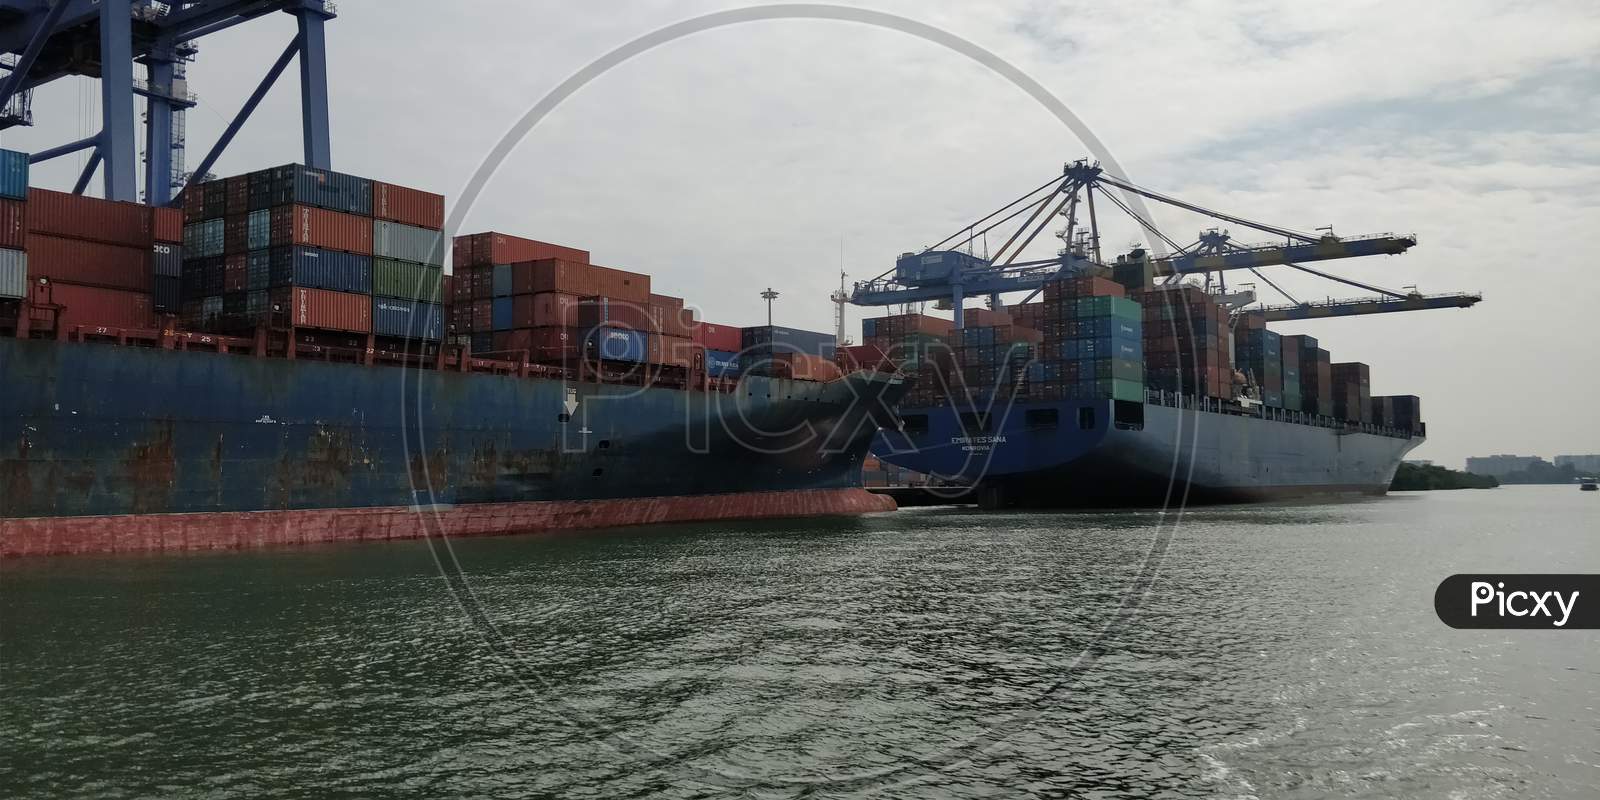 Dubai based Inernational Container at Cochin port